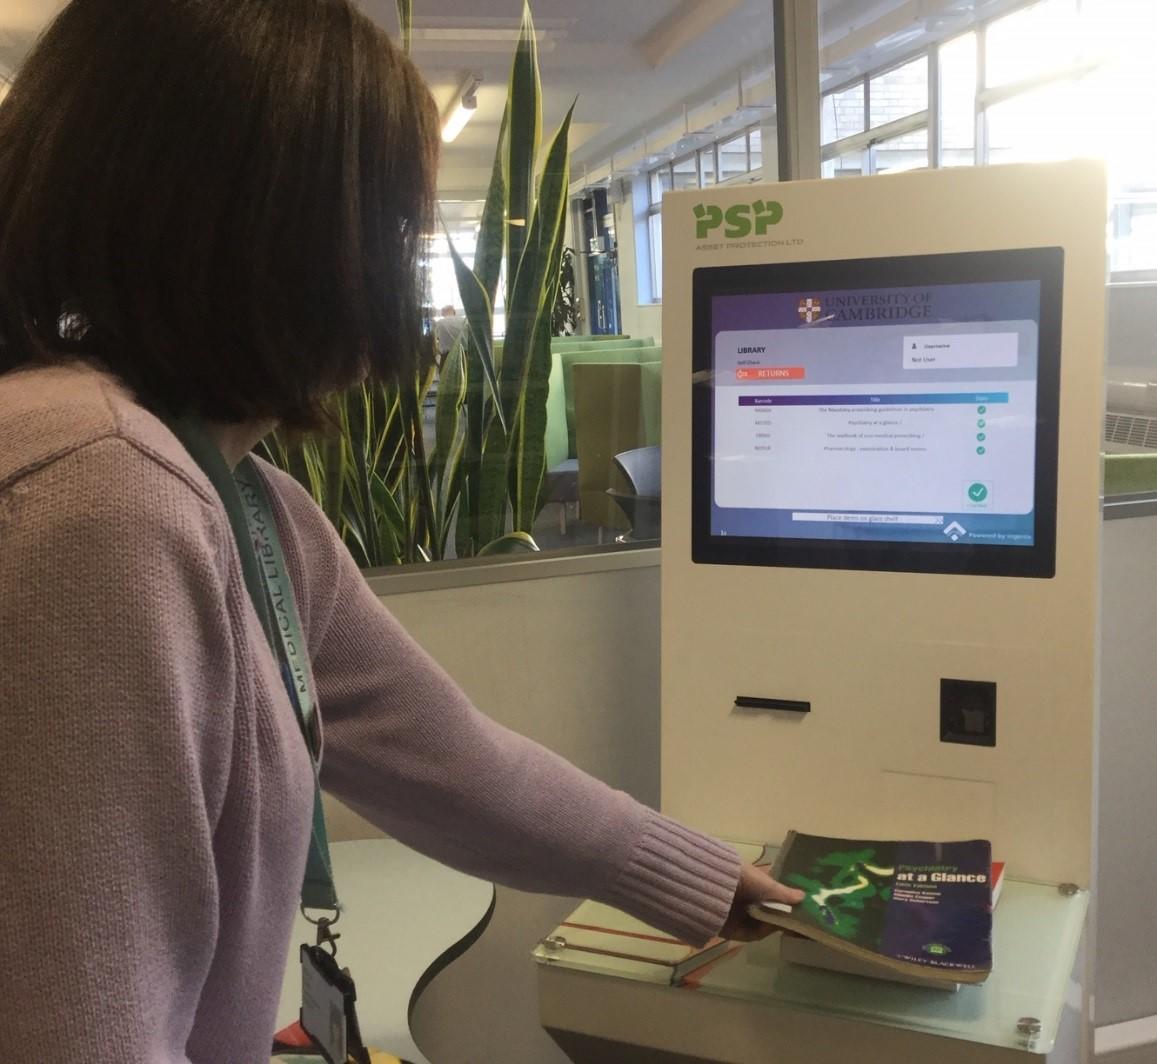 Hongzhou customized library information kiosk with id card reader in library-3